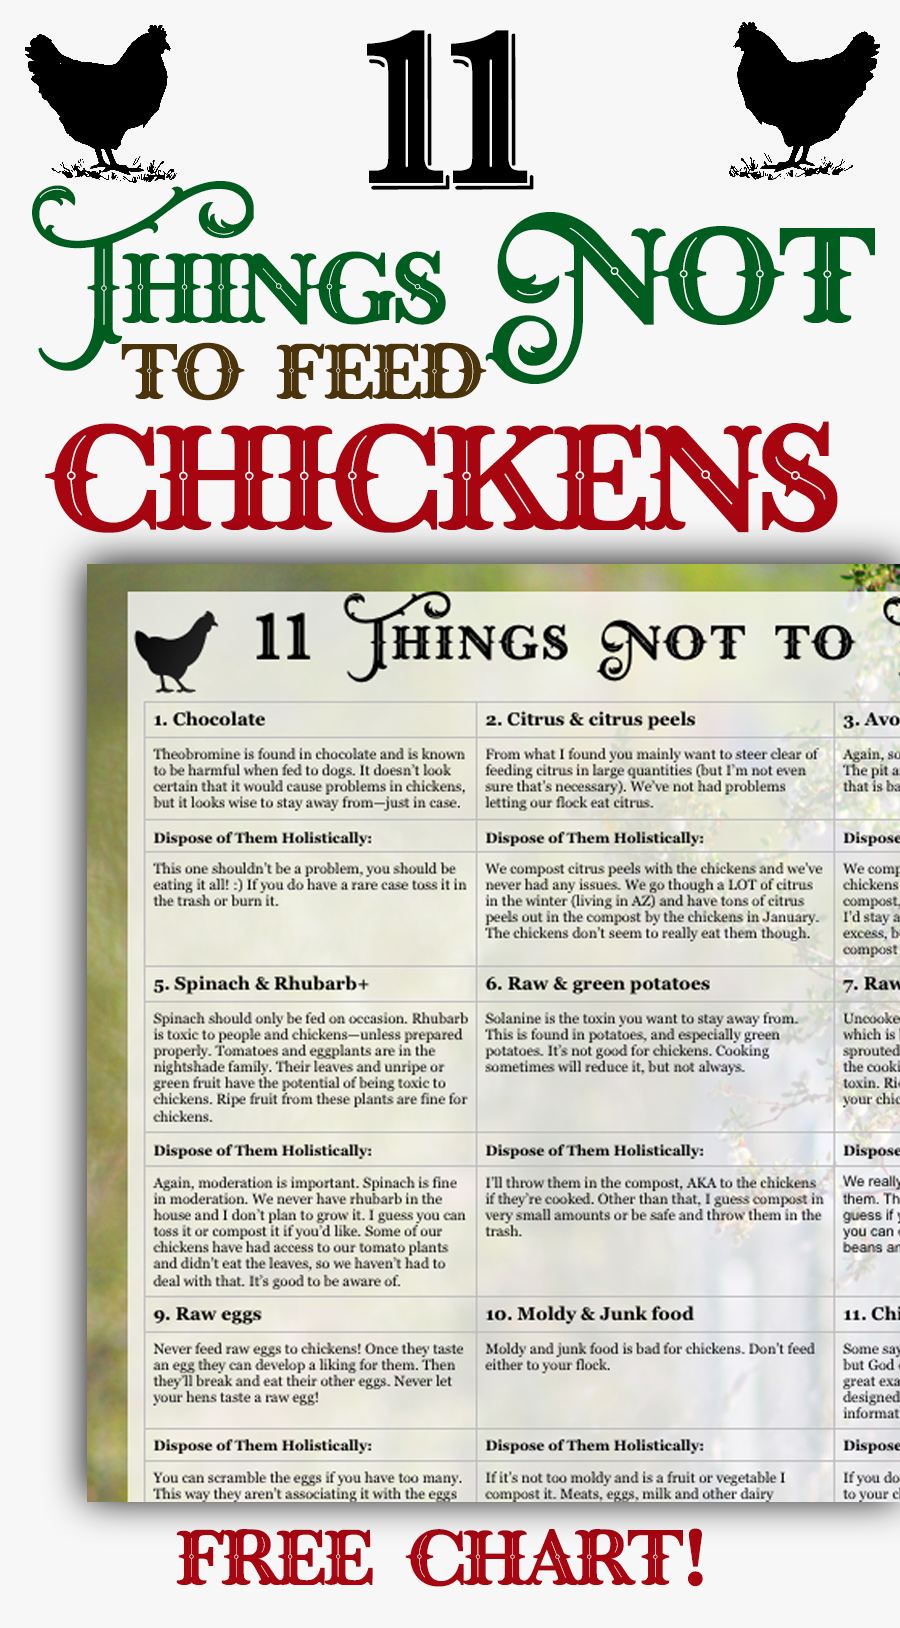 Learn which foods NOT to feed to your chickens with this free downloadable chart! Feeding and raising backyard chickens is easy, but you need to know which foods NOT to feed chickens.